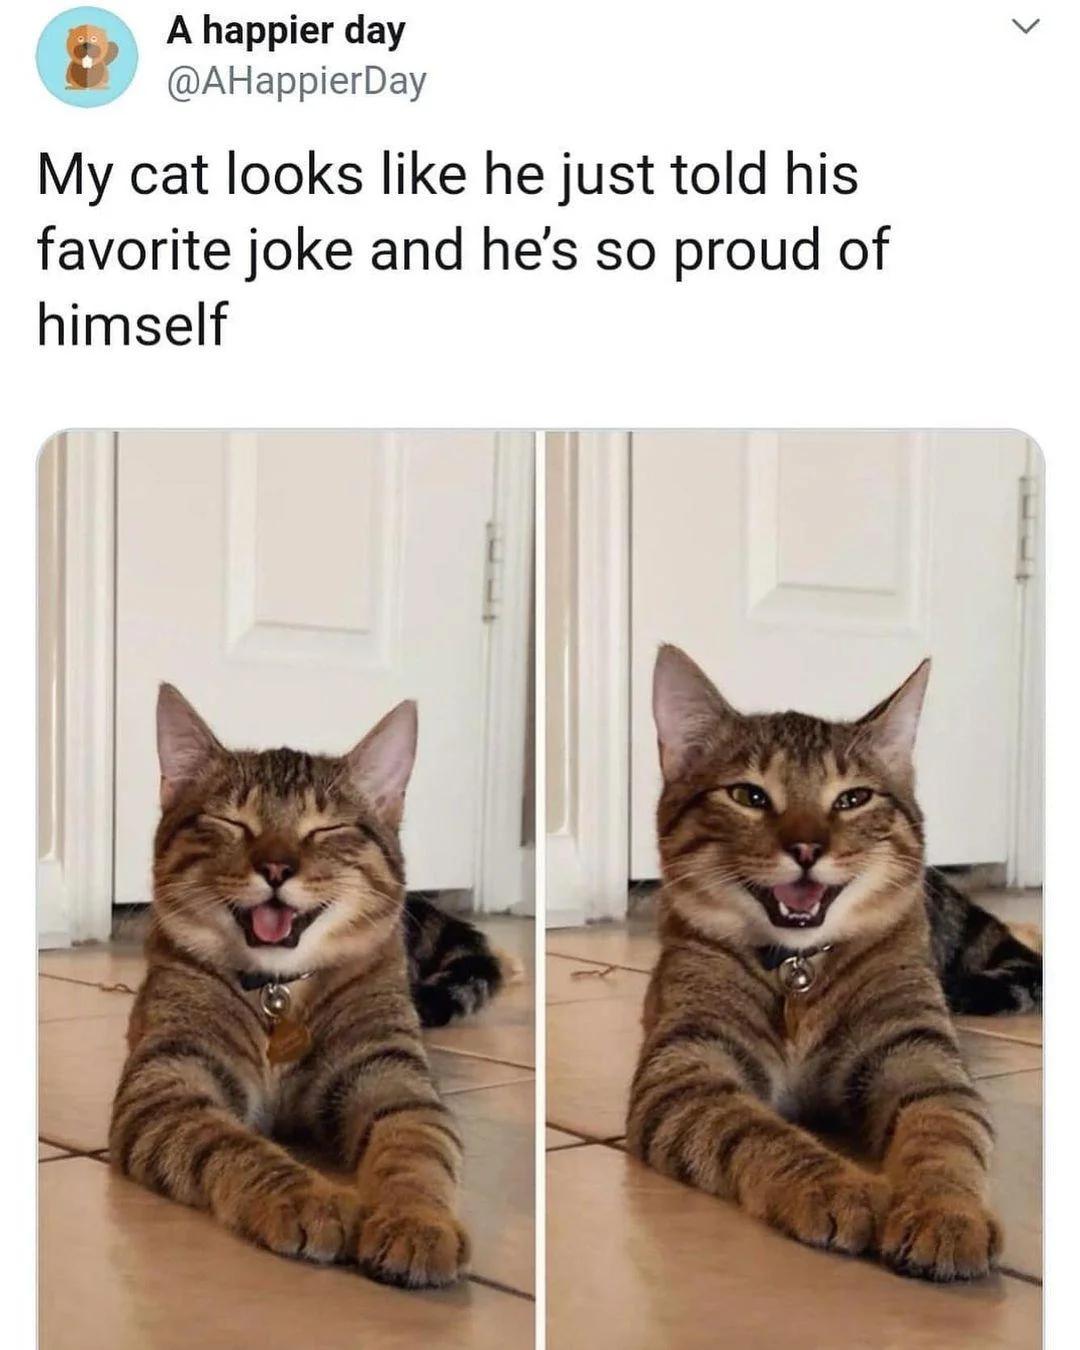 smiling cat who looks like he just told a joke captioned 